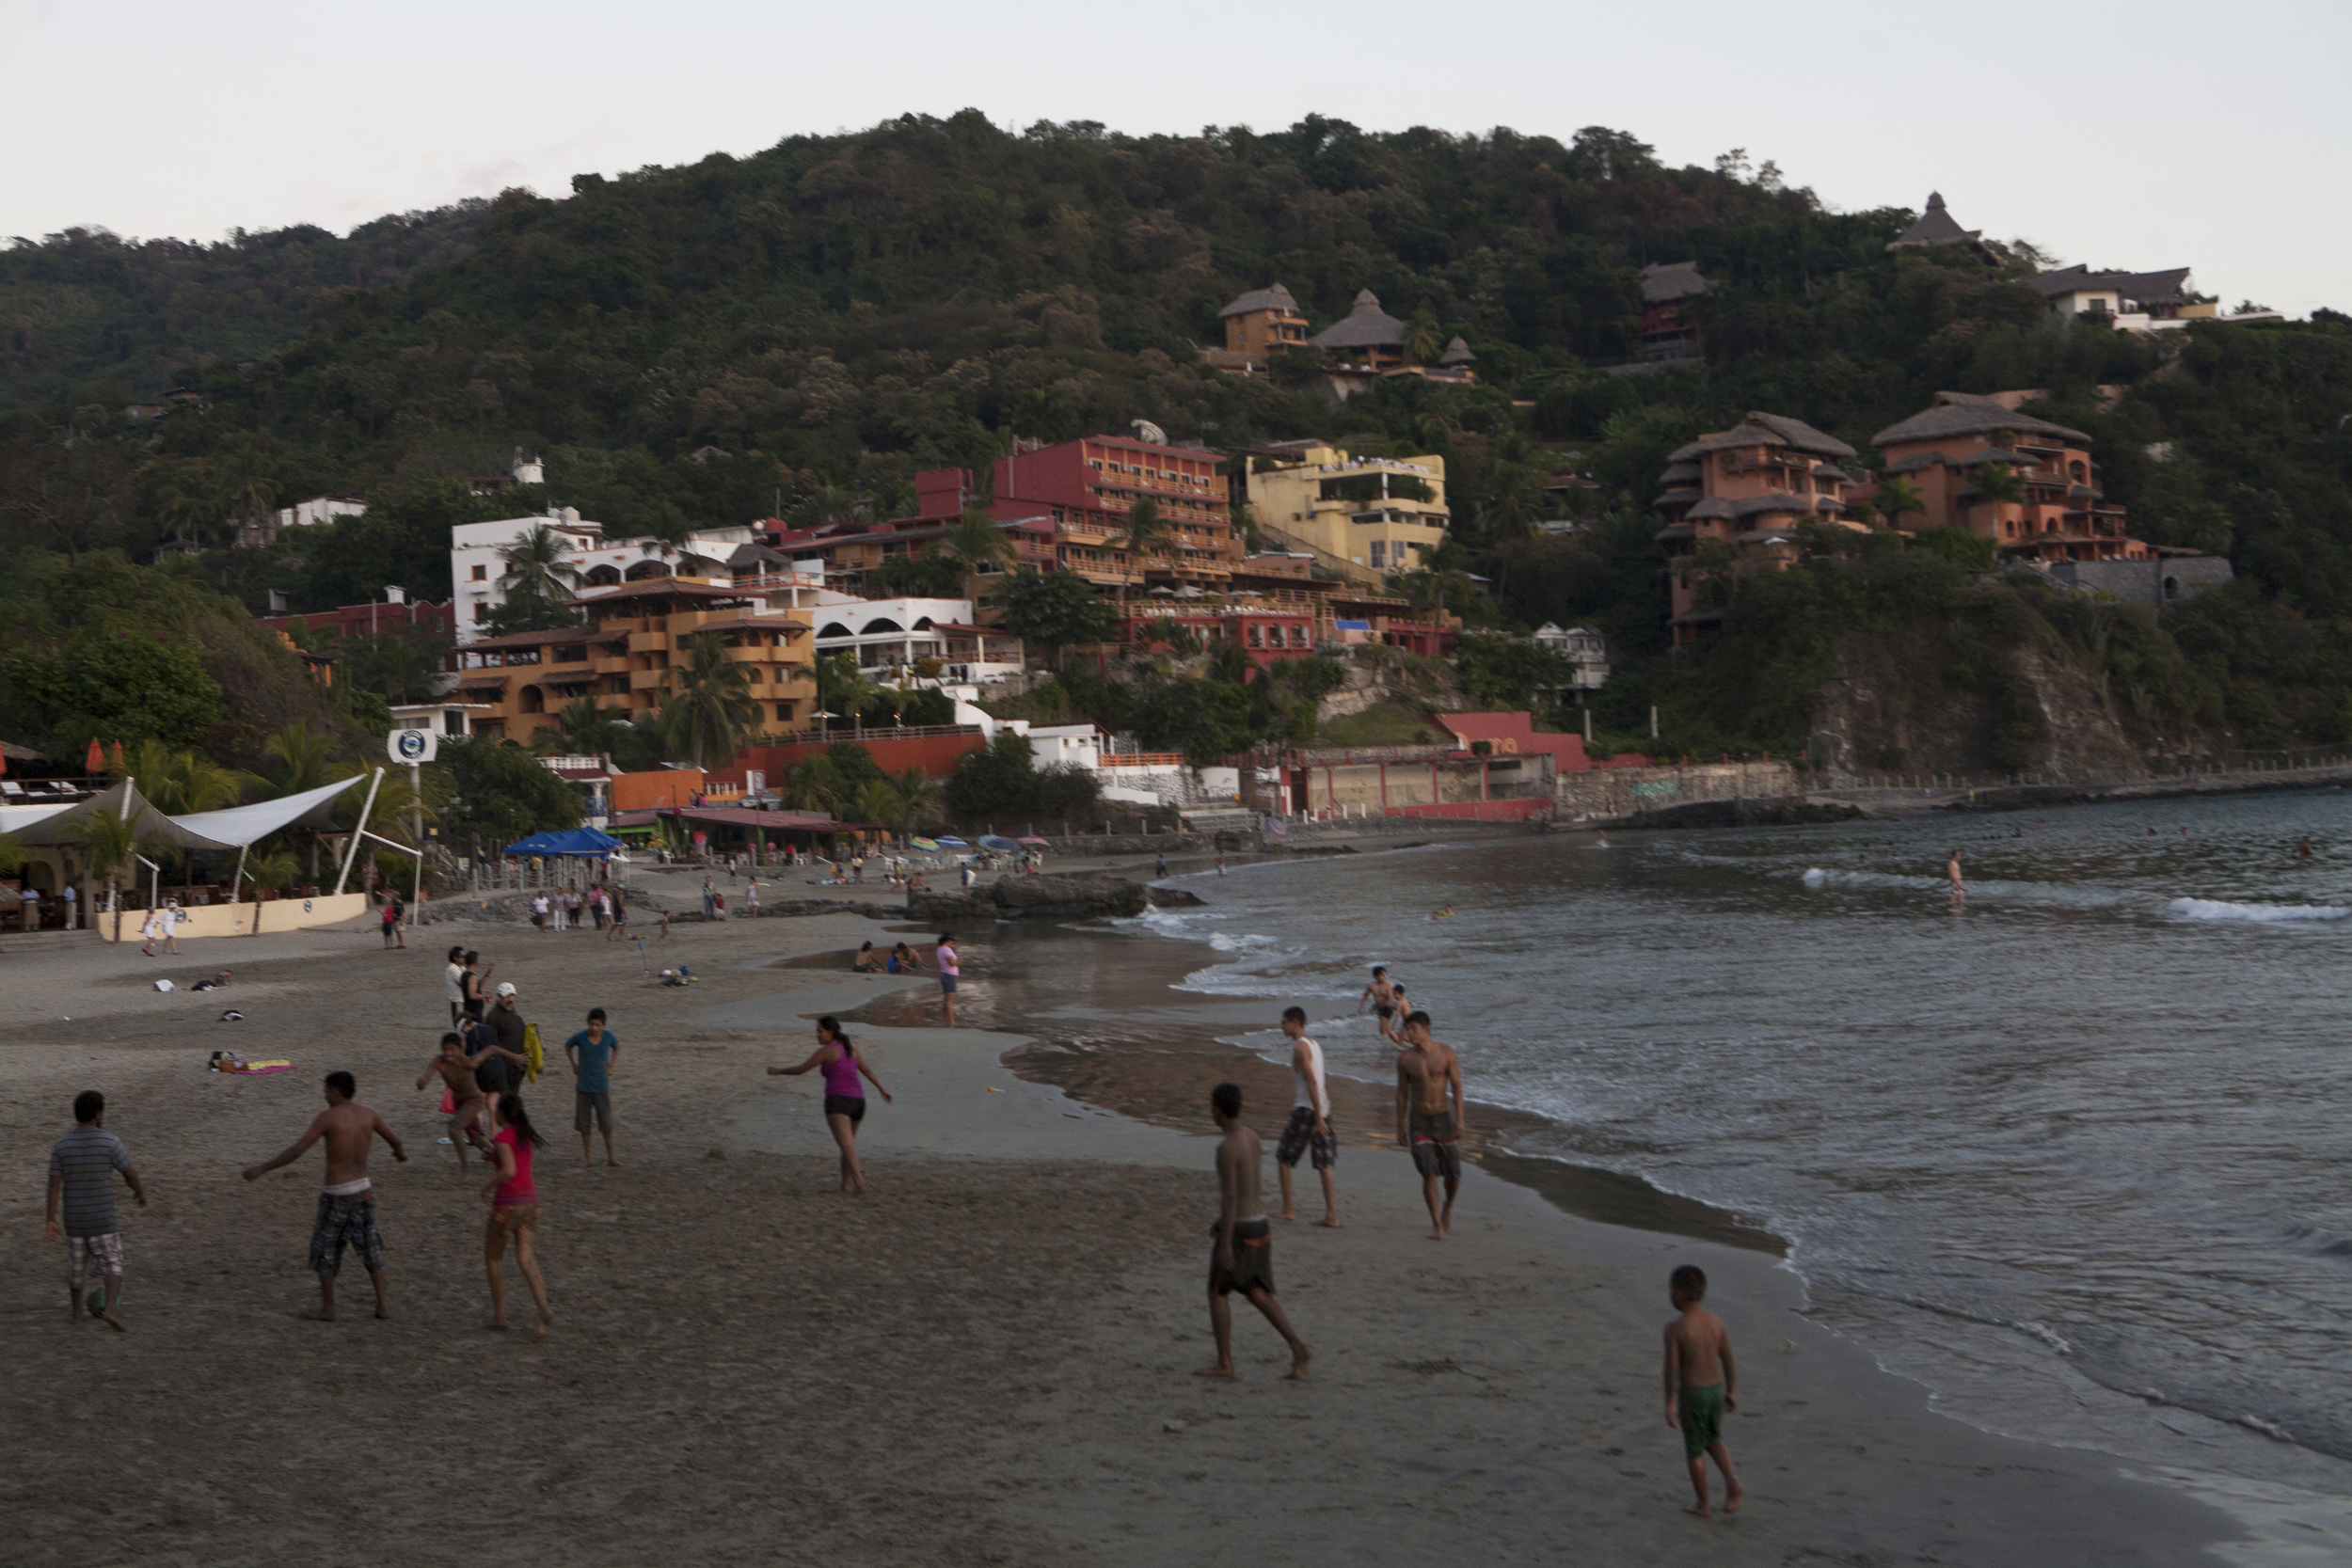  The locals enjoy an evening at Playa La Madera, (Wood Beach), a half mile stretch of sand where humble family eateries, restaurants, bungalows and hotels dot the cement and sand walkway. ©Gail Fisher&nbsp; 